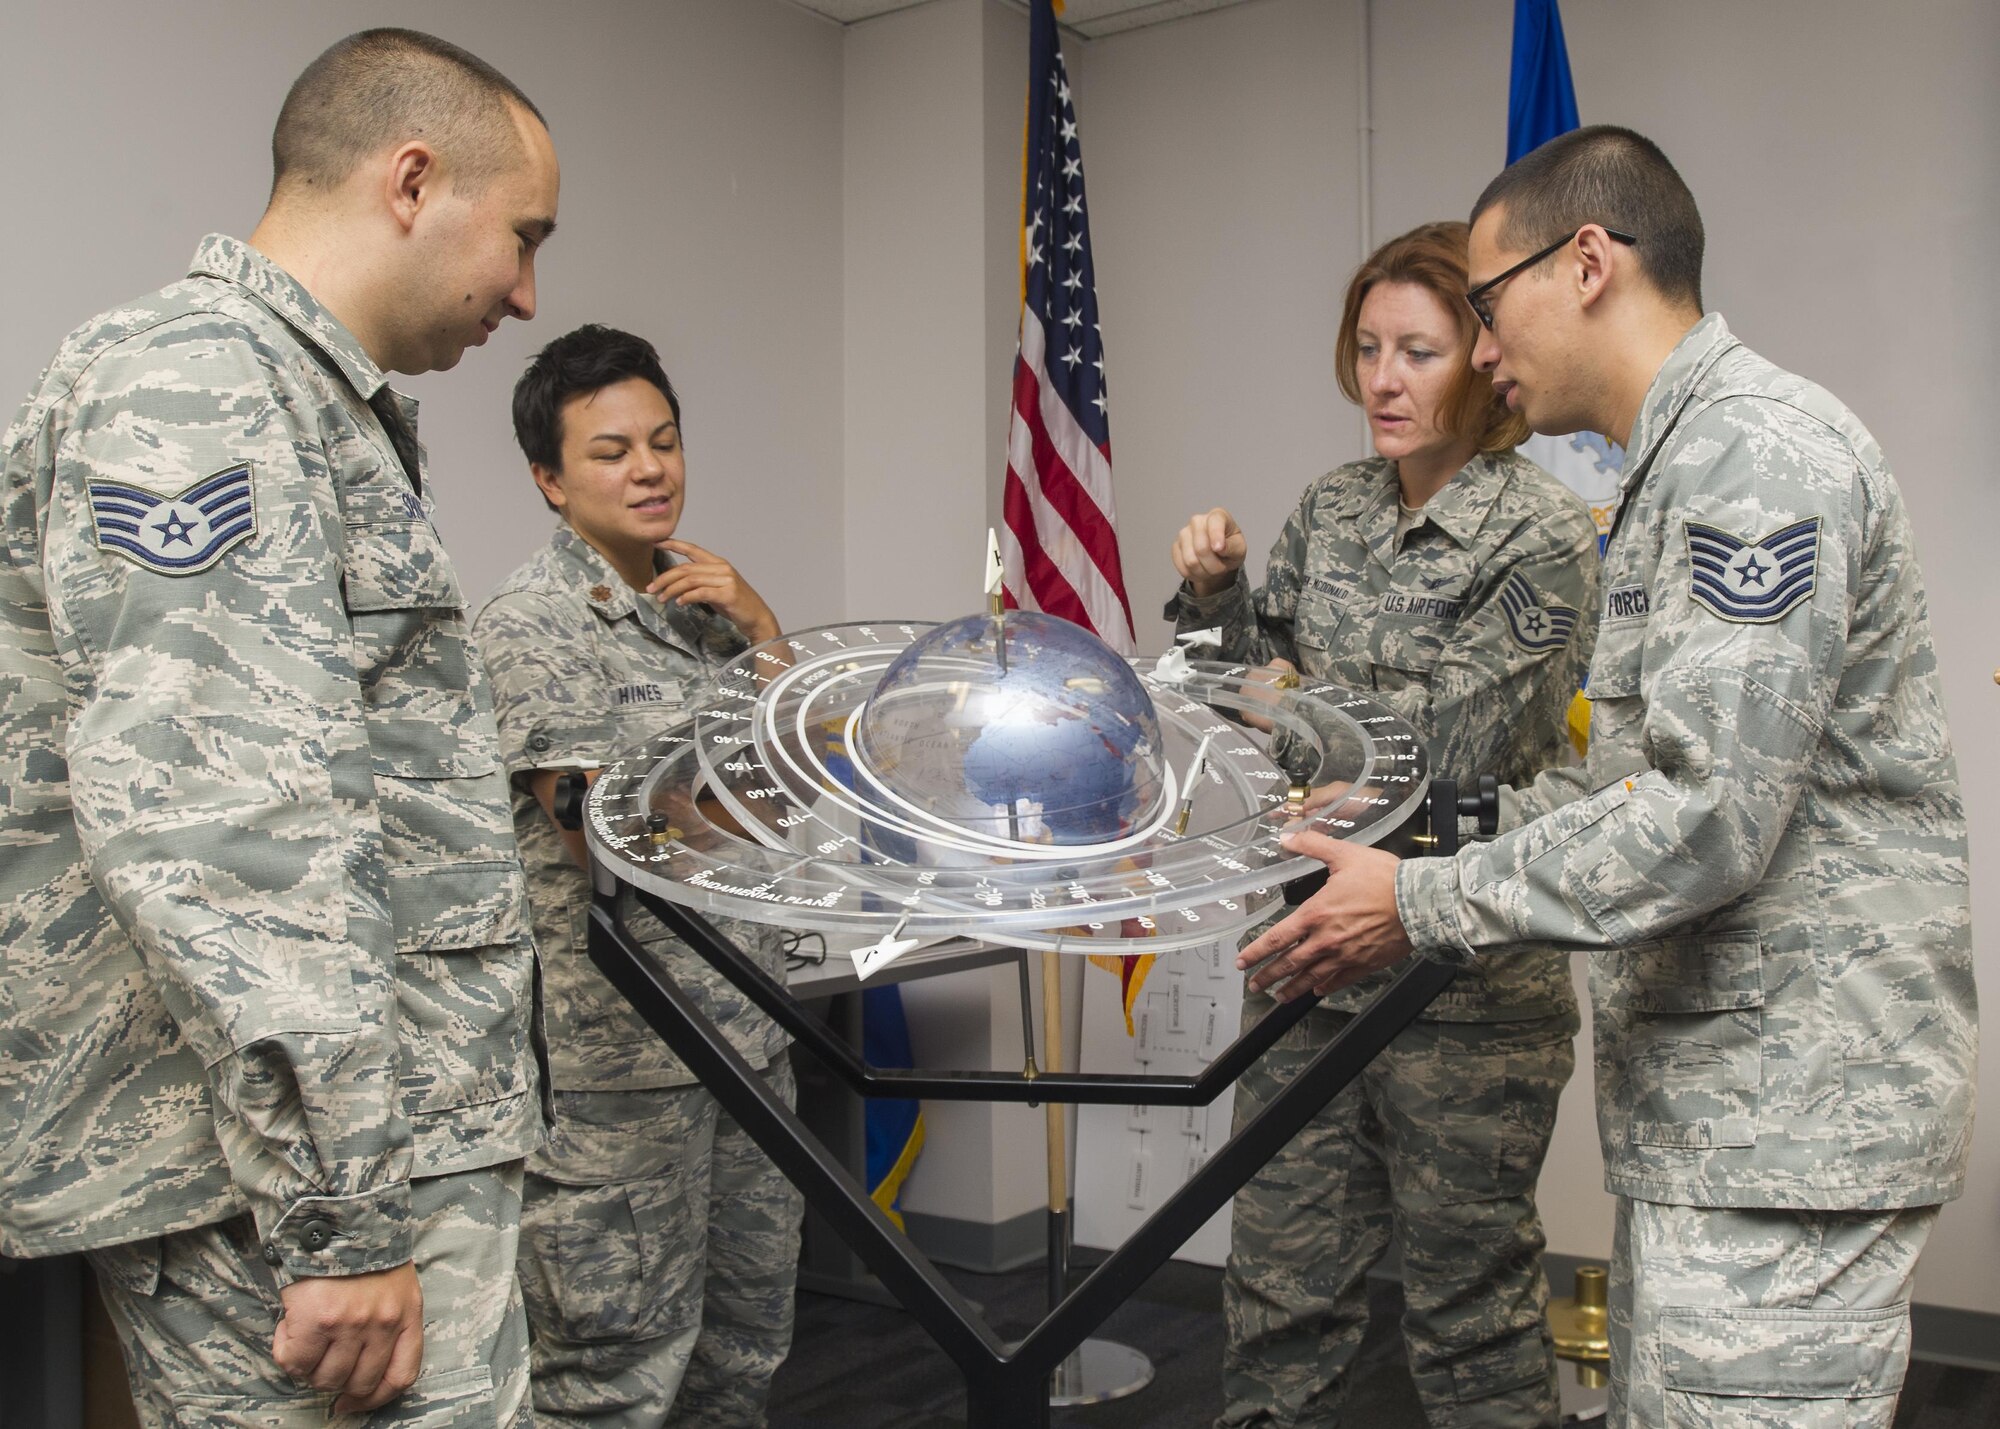 Members of the 310th Operations Support Squadron discuss the tracking of satellites orbiting the earth using a training aid on Saturday, Sep. 9th, 2017.